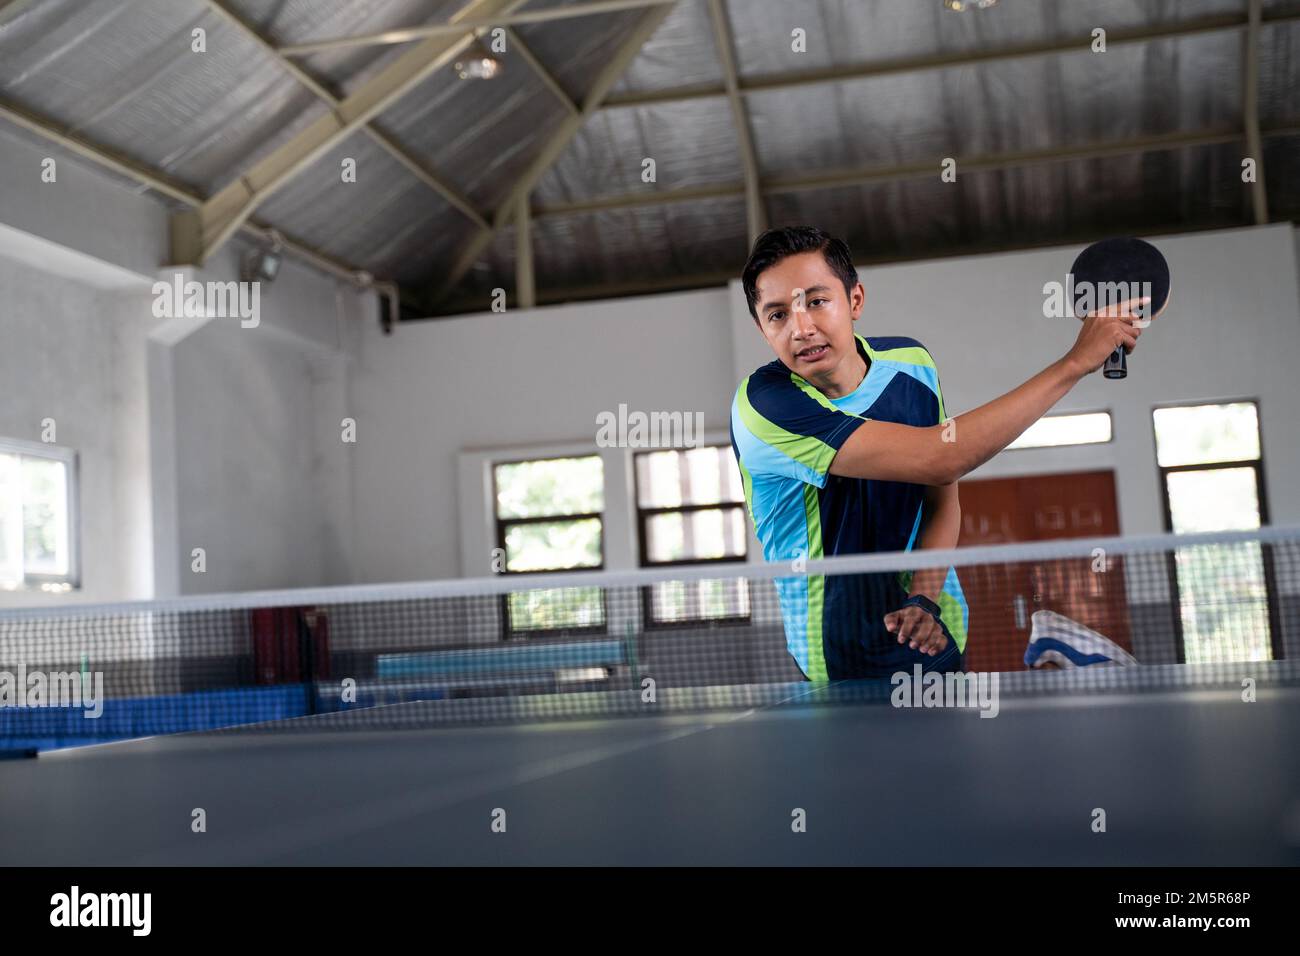 male ping pong athlete hitting smash in ping pong match Stock Photo - Alamy